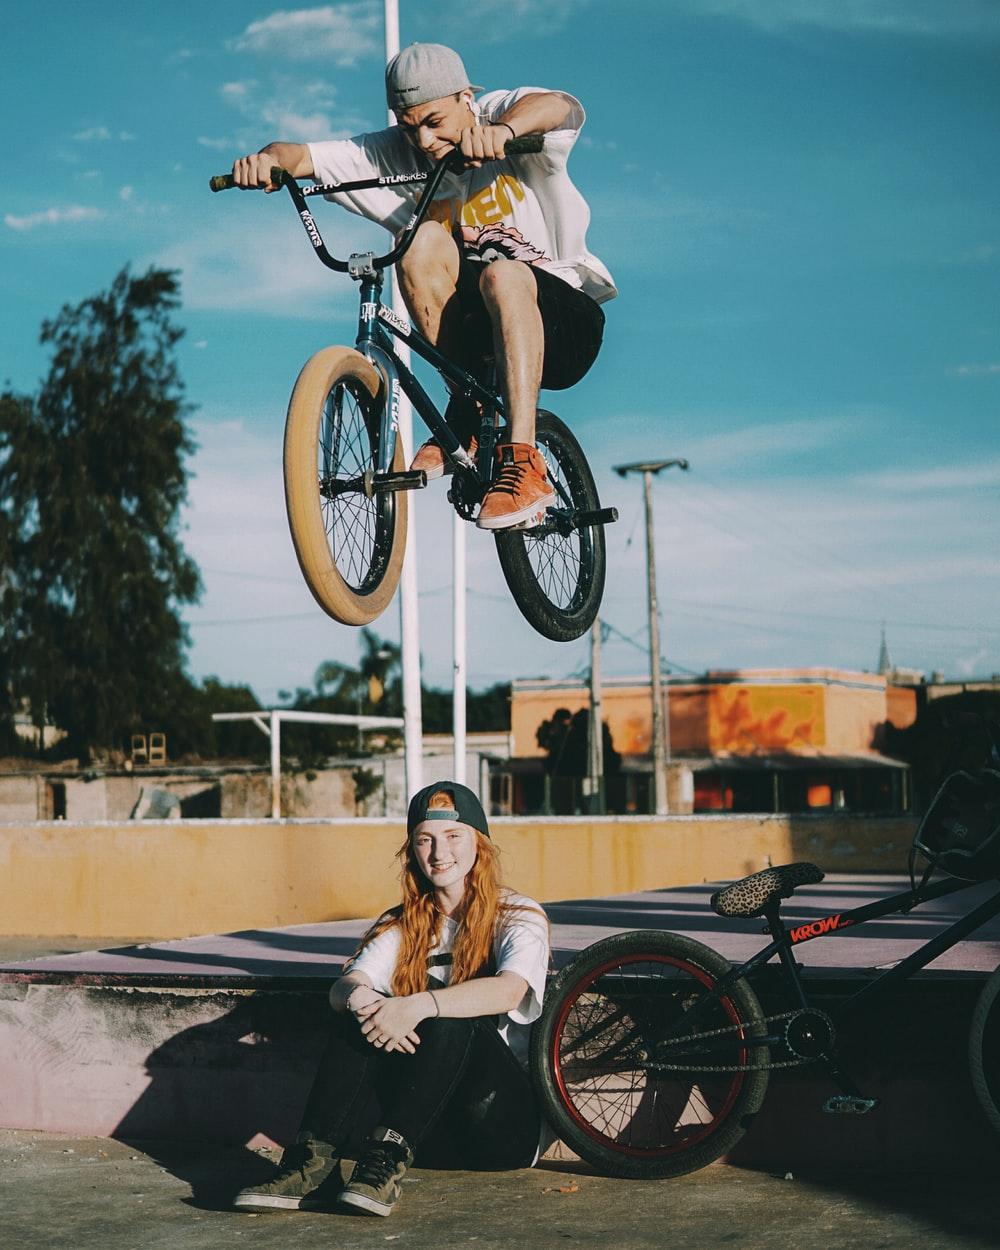 Bmx Picture [HD]. Download Free Image